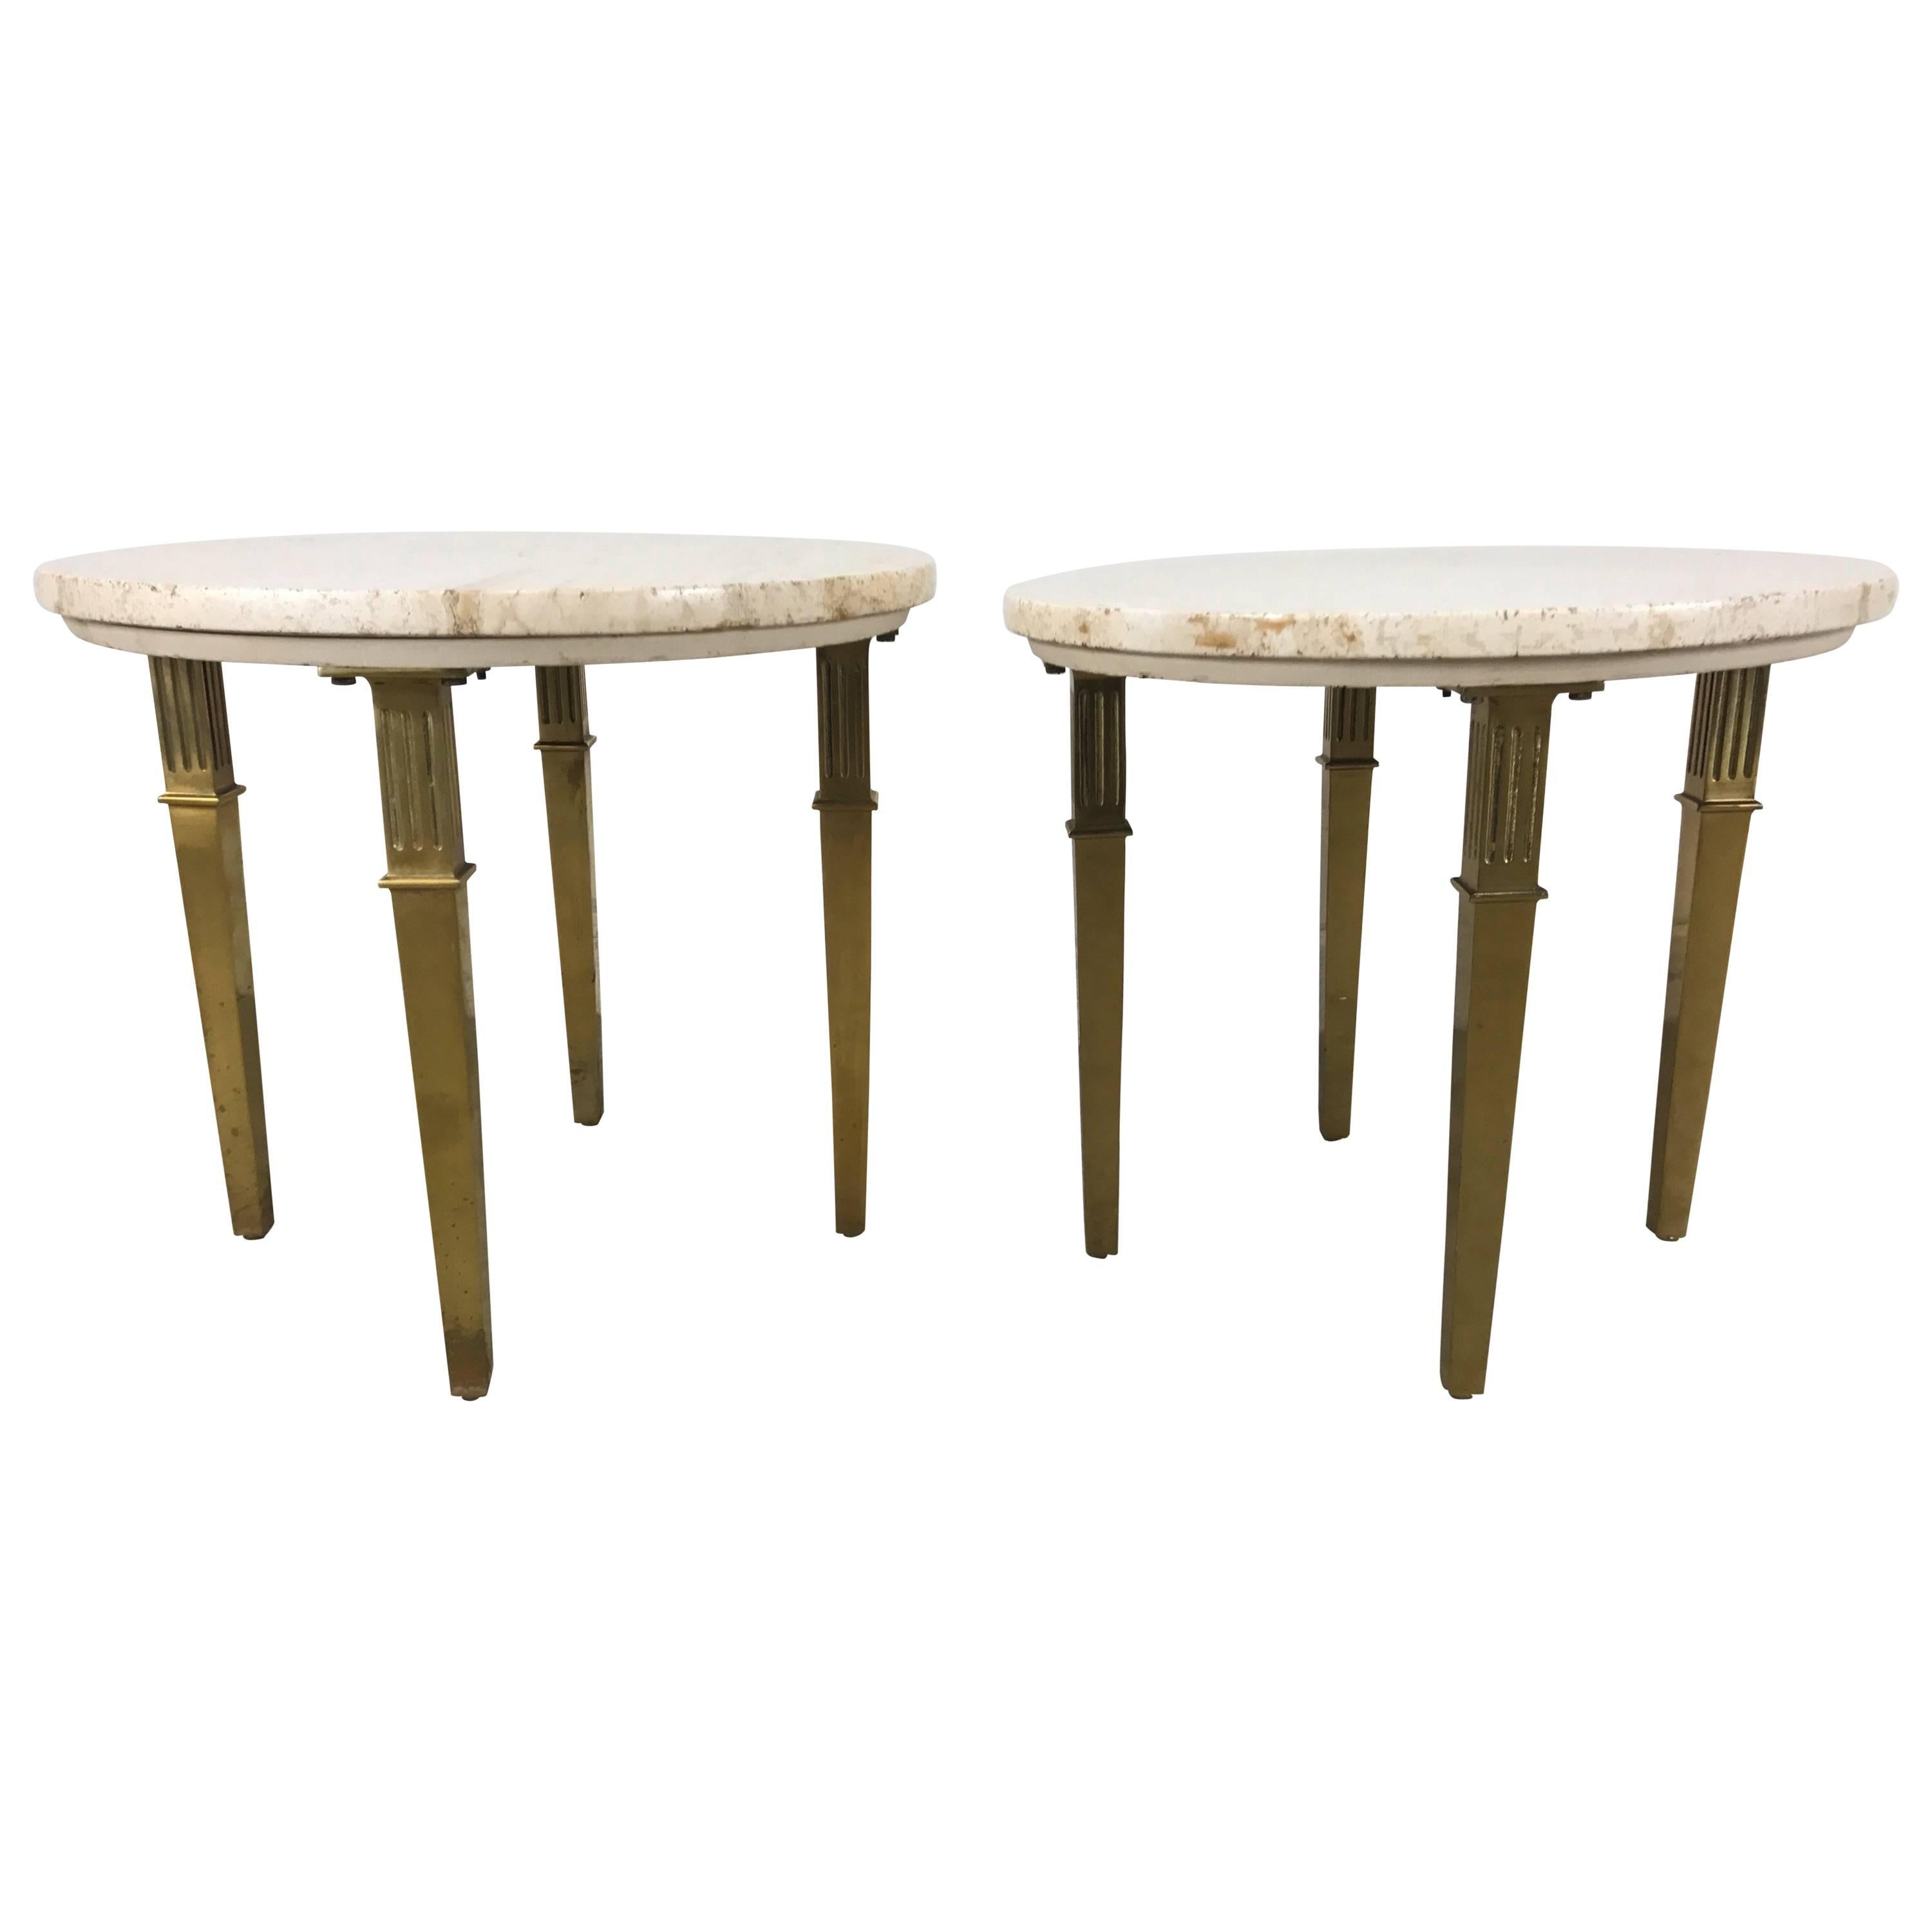 Pair Regency Marble and Brass Italian Tables Attributed to Mastercraft For Sale